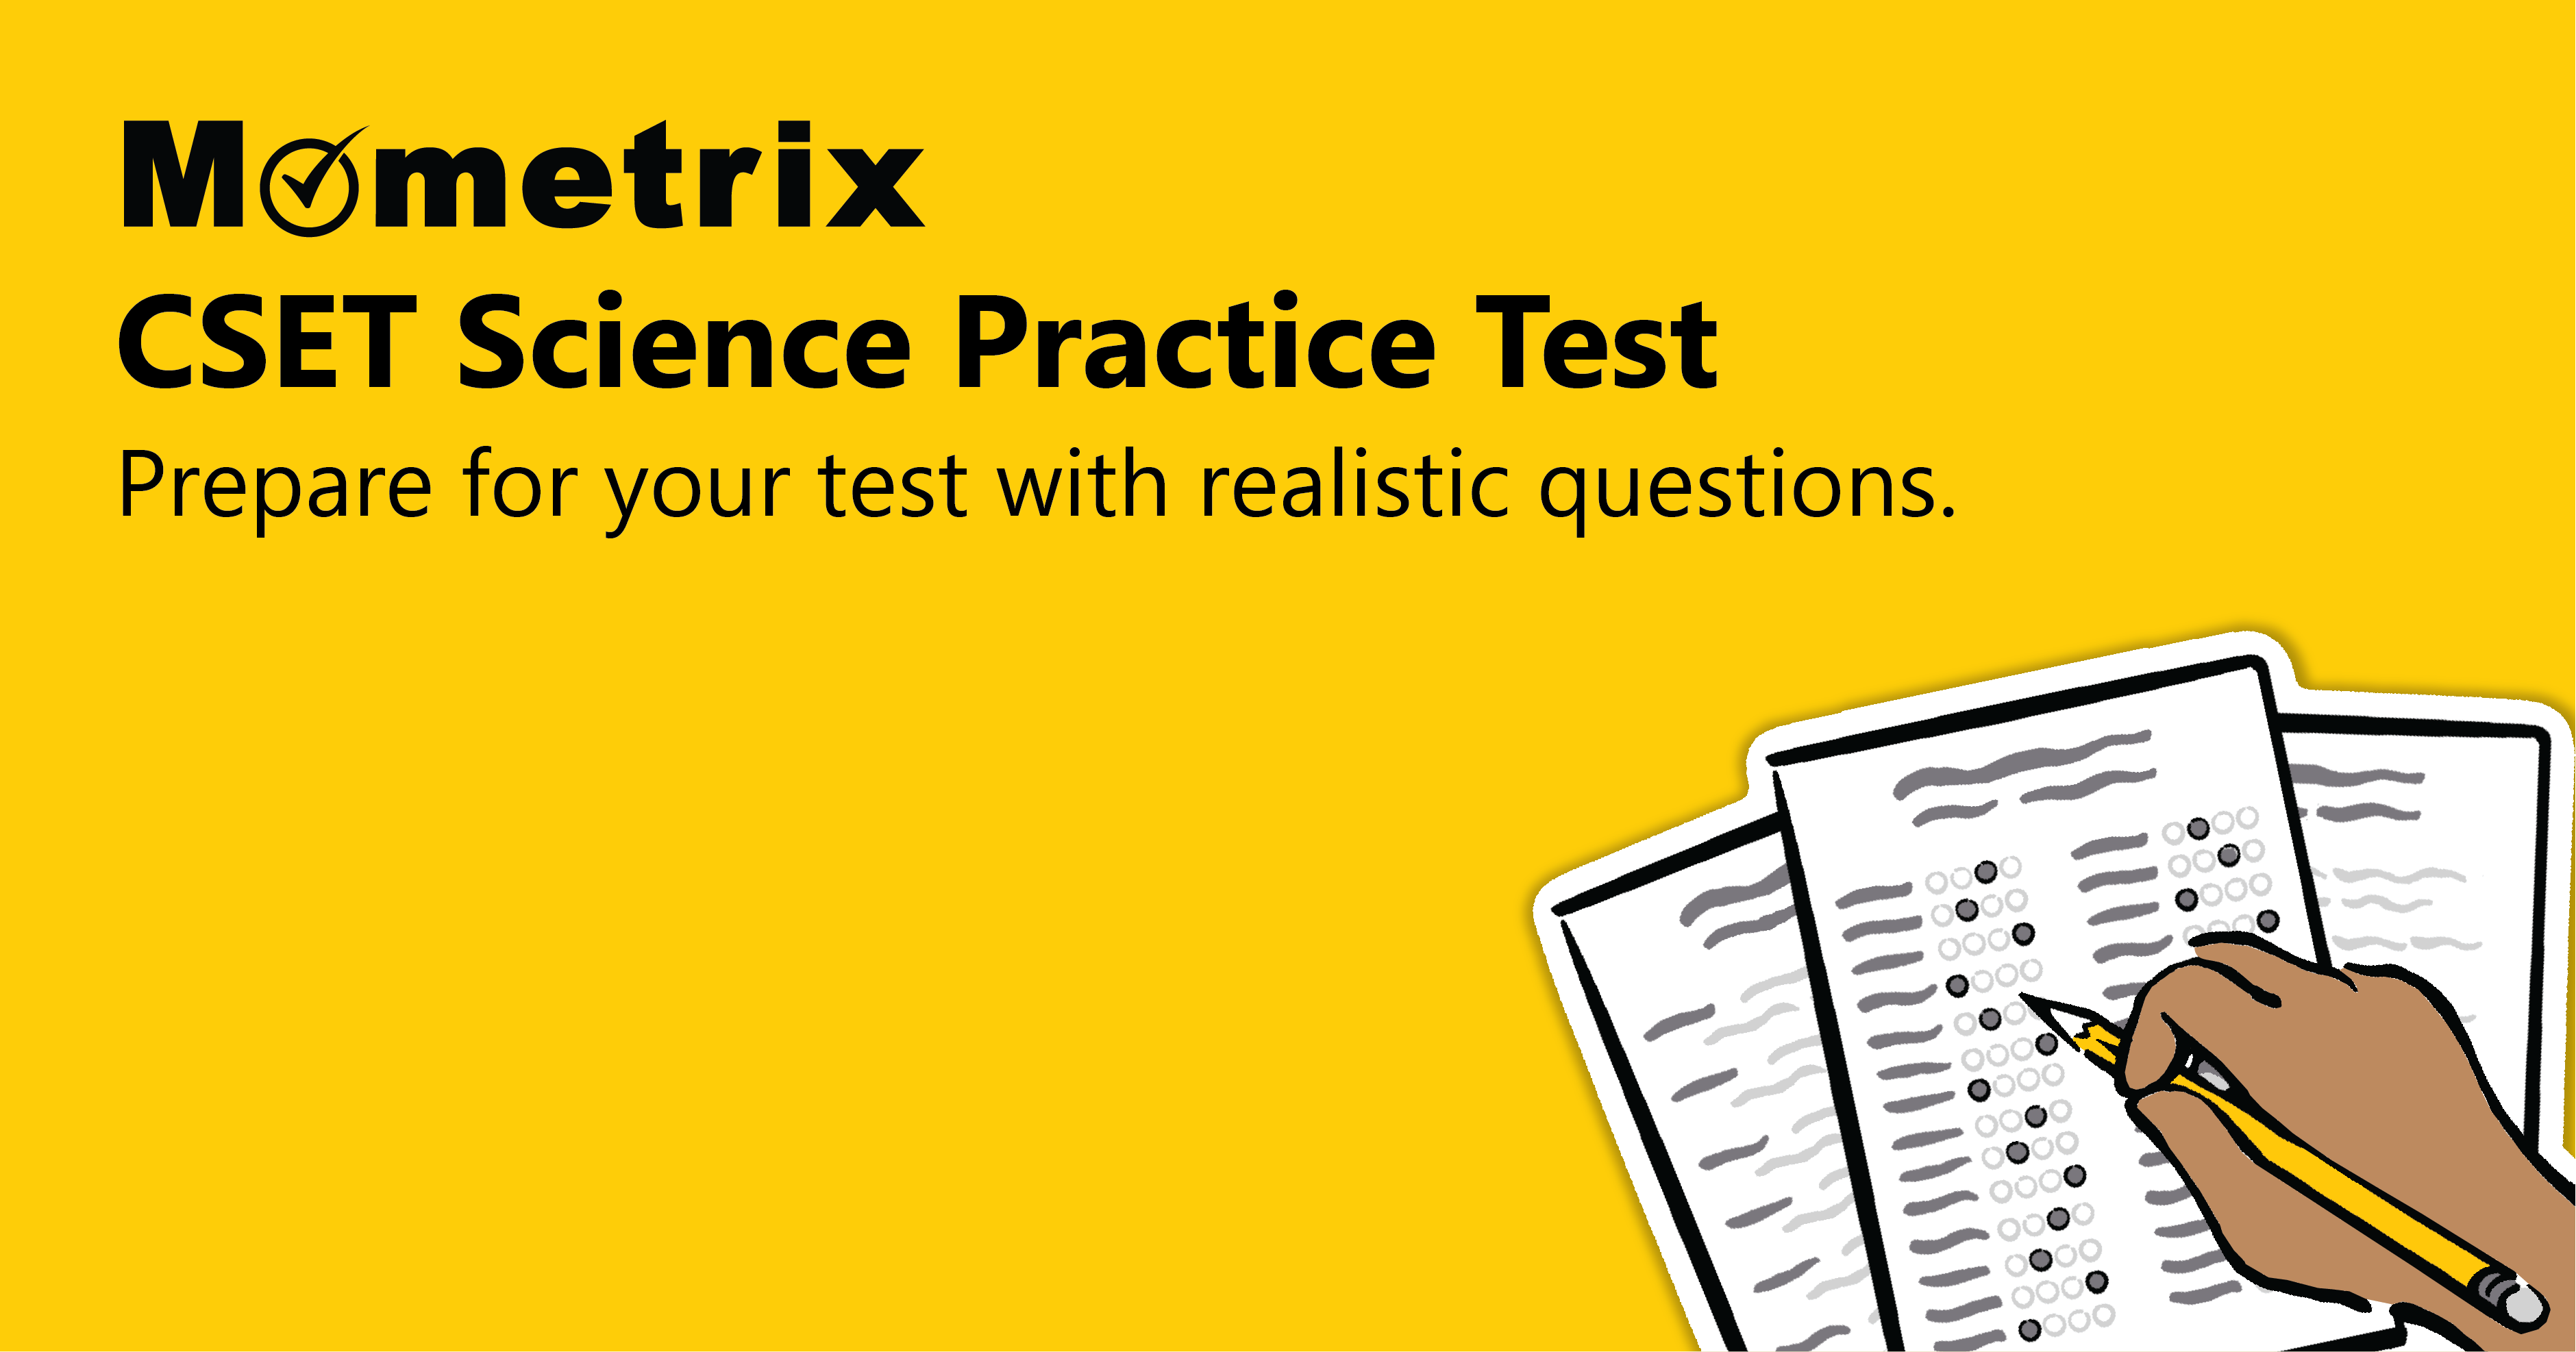 Yellow graphic featuring text "Mometrix CSET Science Practice Test" and "Prepare for your test with realistic questions." Includes an illustration of a hand filling out a multiple-choice test.